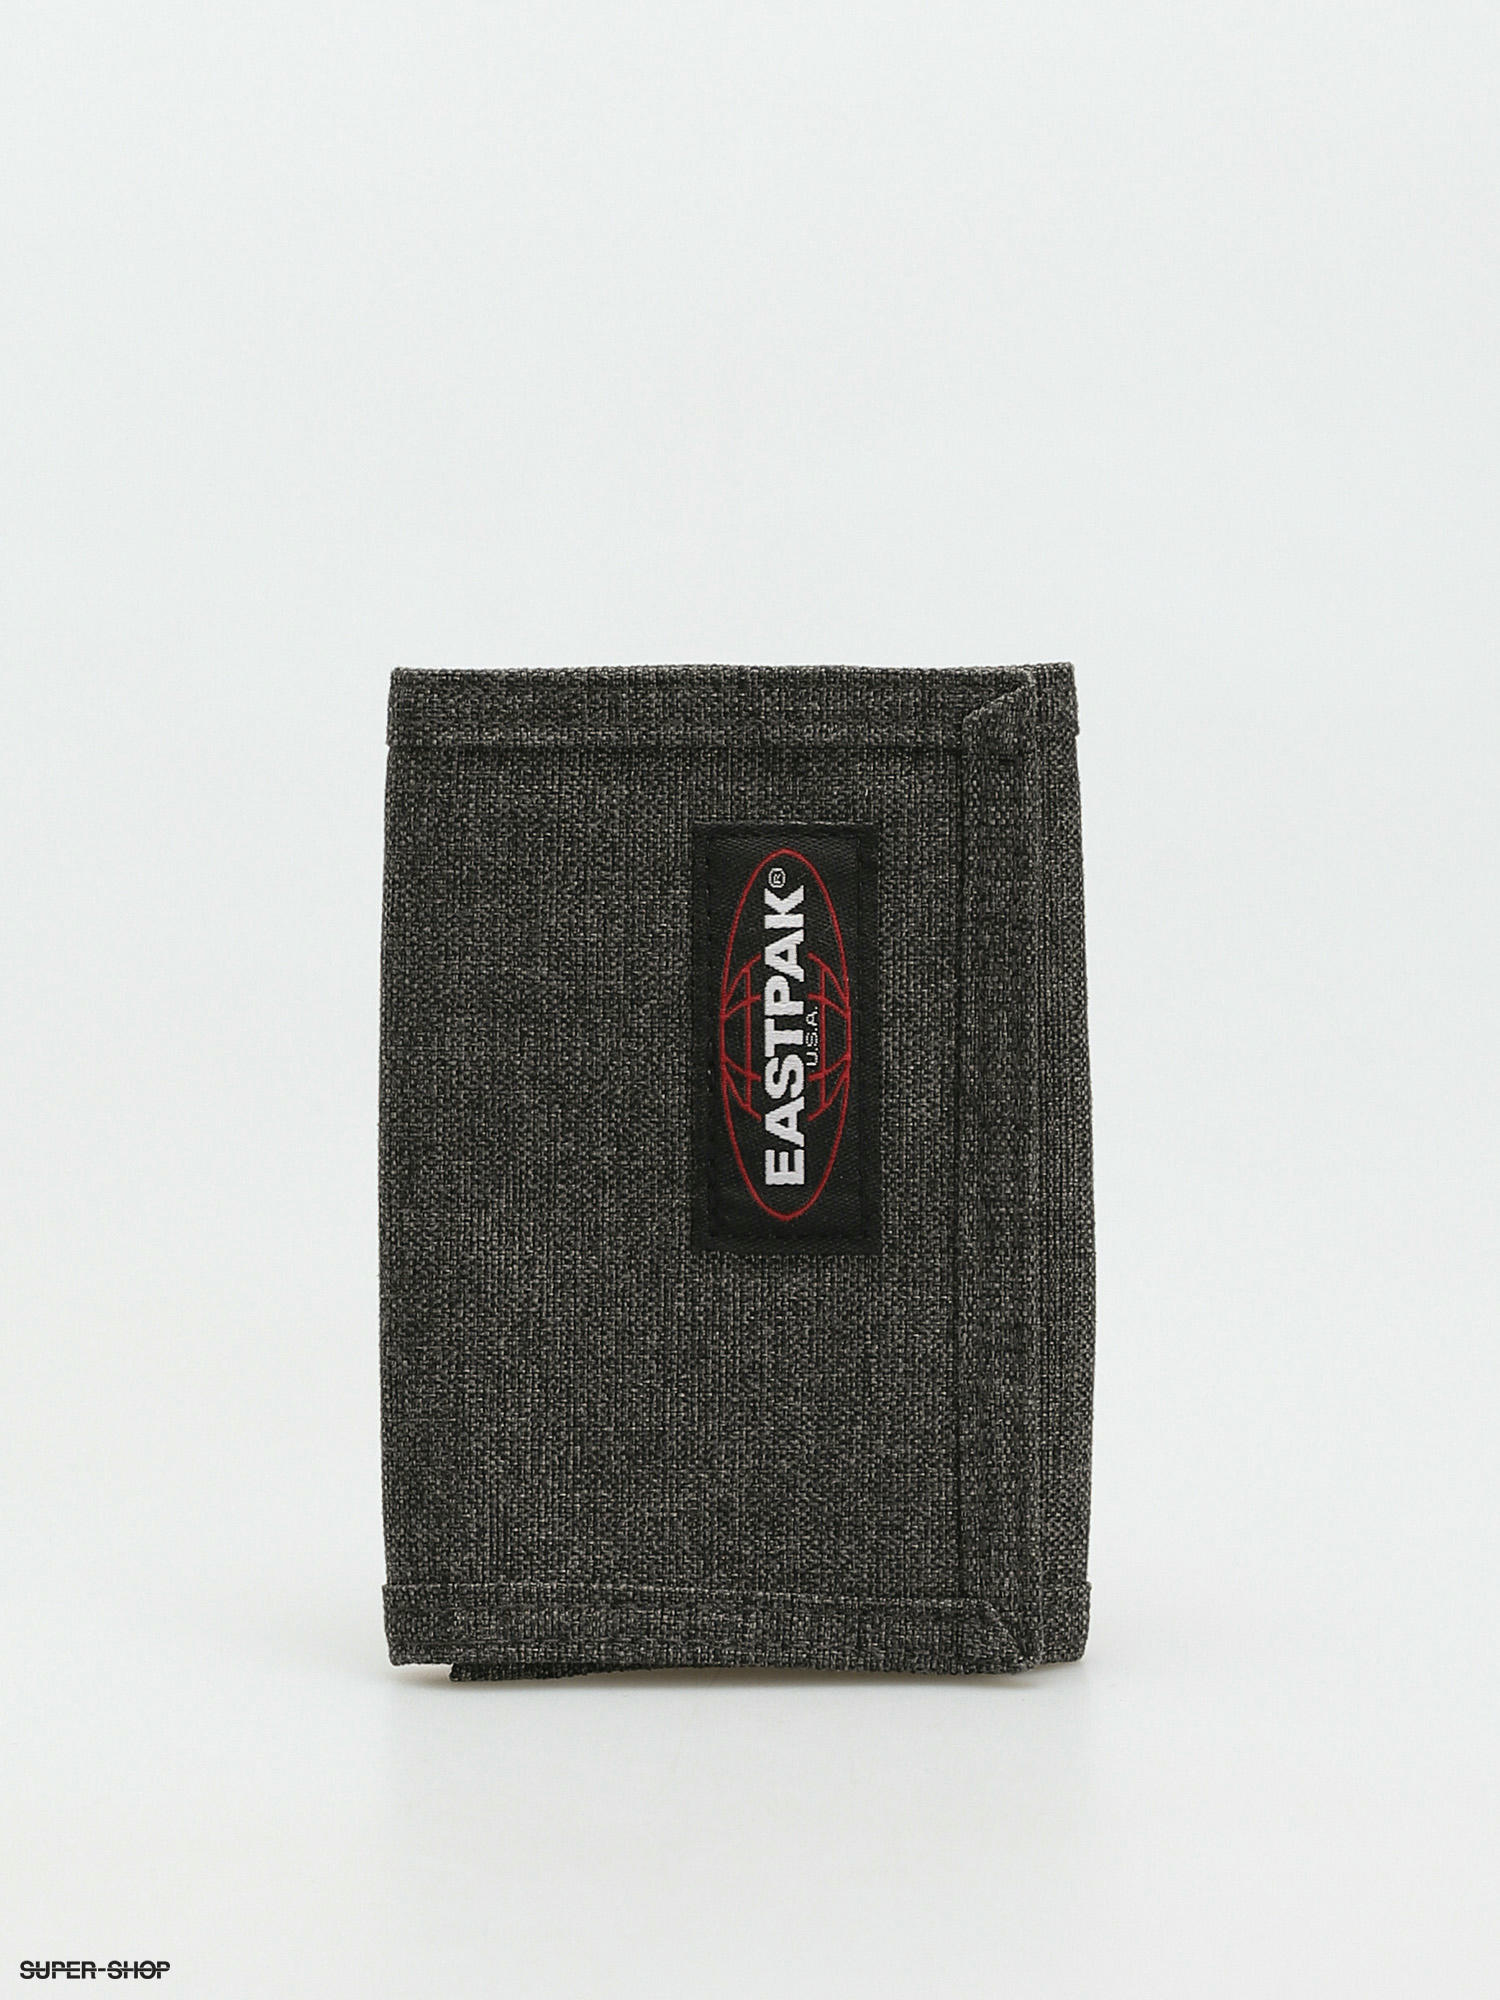 Eastpak Crew - Slim Wallet With Ring For Keychain - Cloud Navy